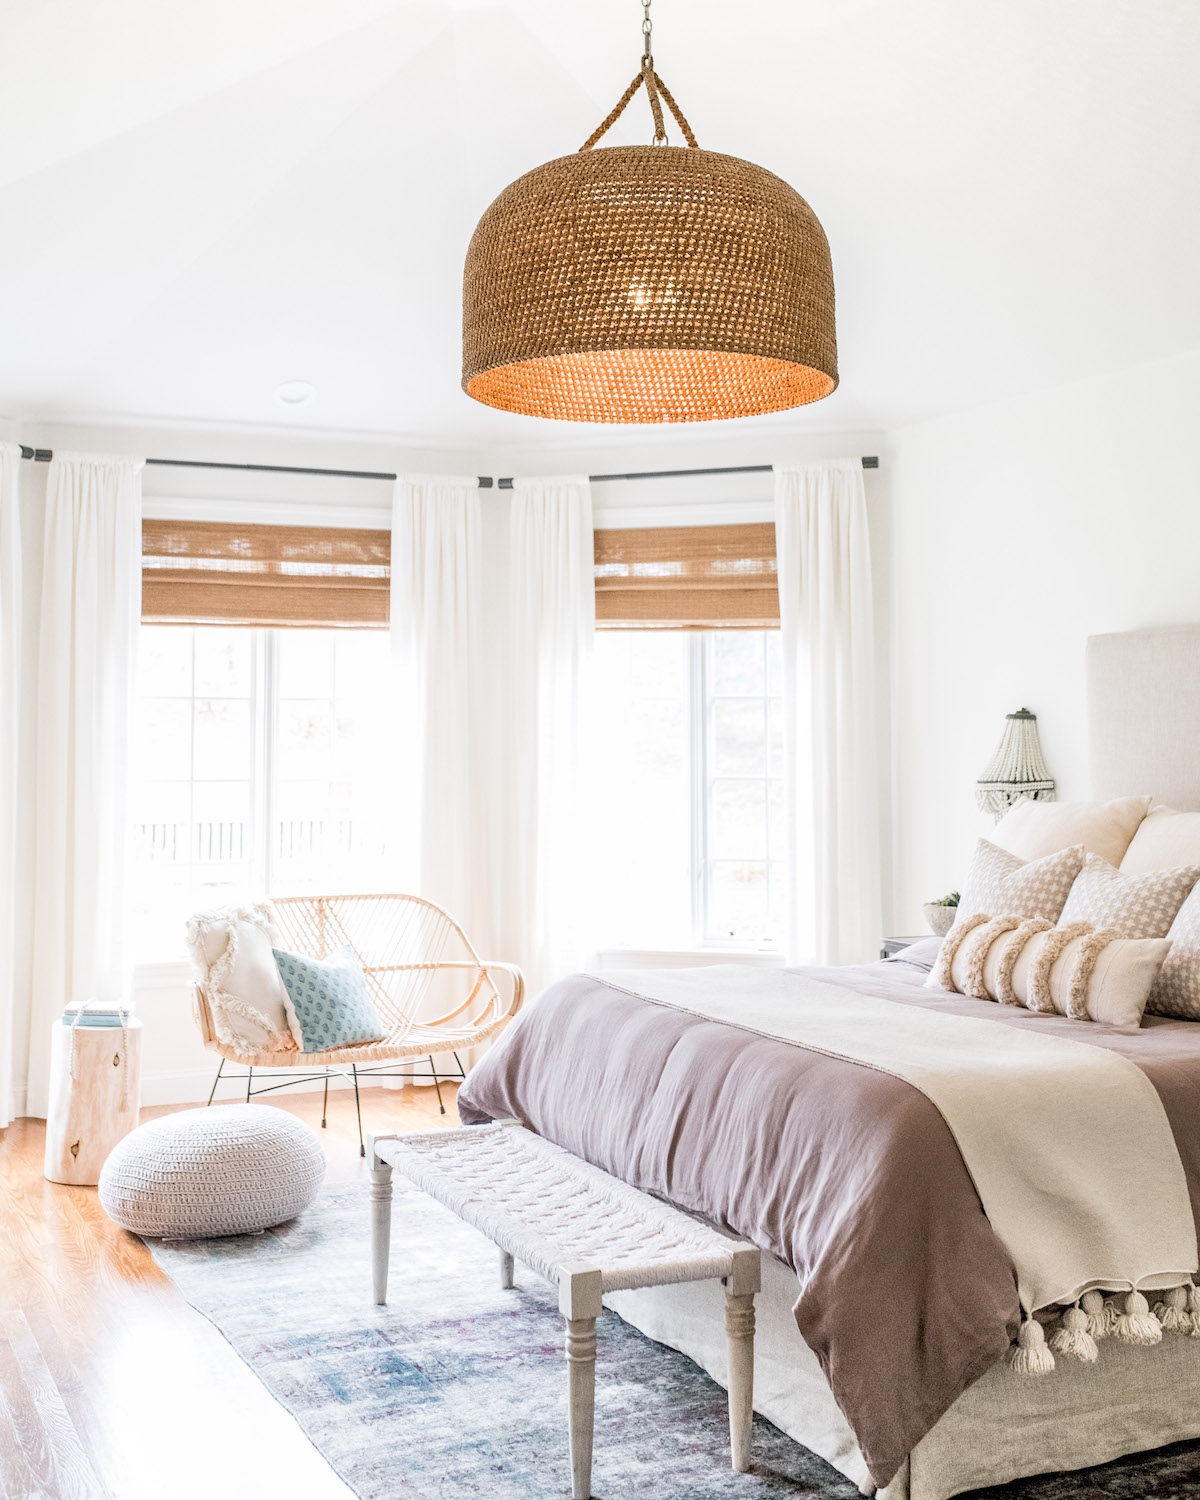 A Classy Neutral Boho Bedroom With Statement Lighting Haven